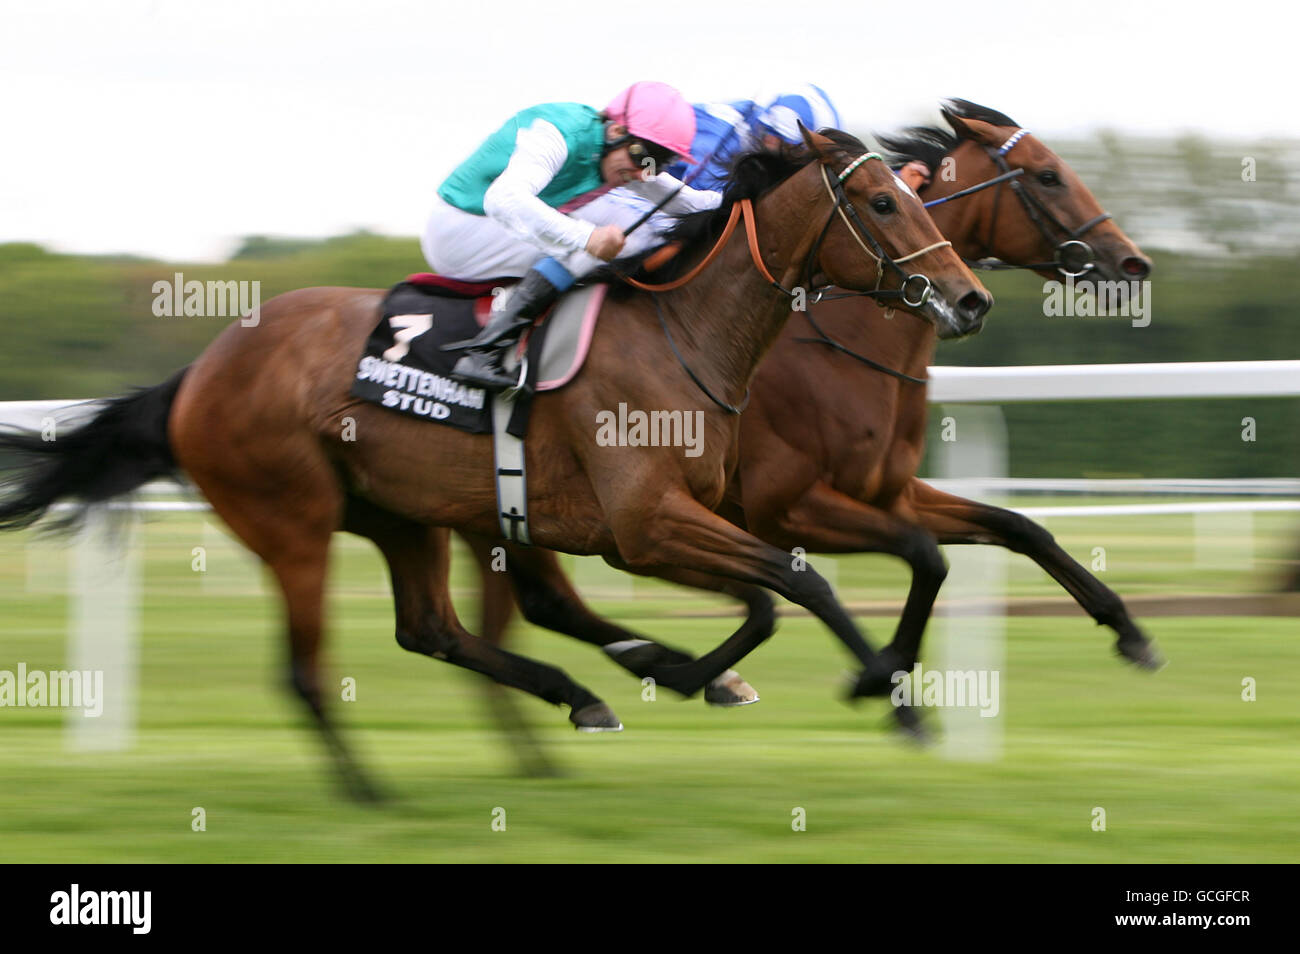 Horse Racing - Berkshire County Blind Society Centenary Raceday - Newbury Racecourse. Principal Role ridden by Eddie Ahern (pink) wins the Swettenham Stud Fillies' Trial Stakes Stock Photo